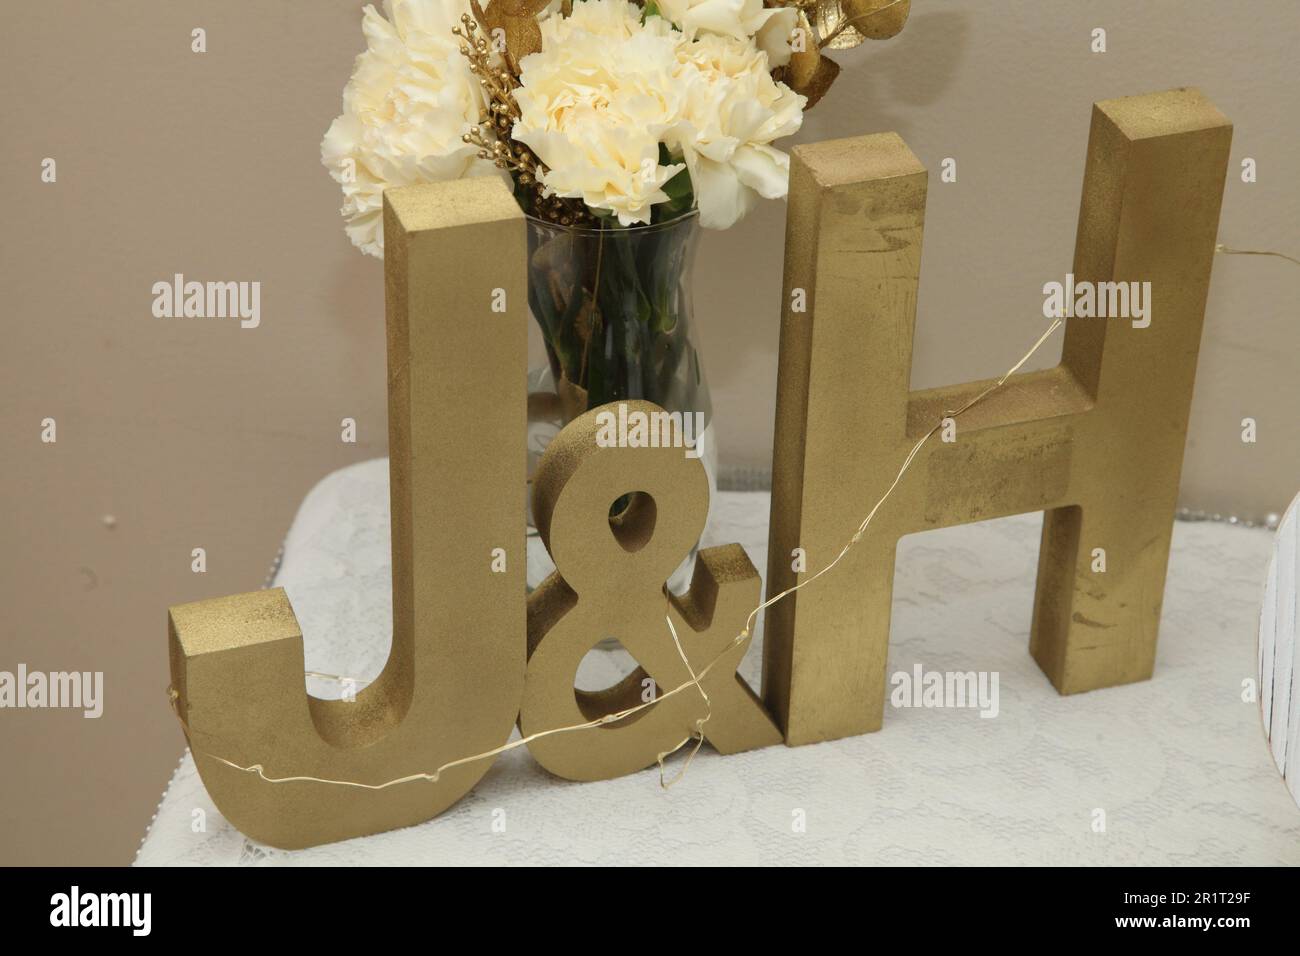 Initials of the names of the bride and groom Stock Photo